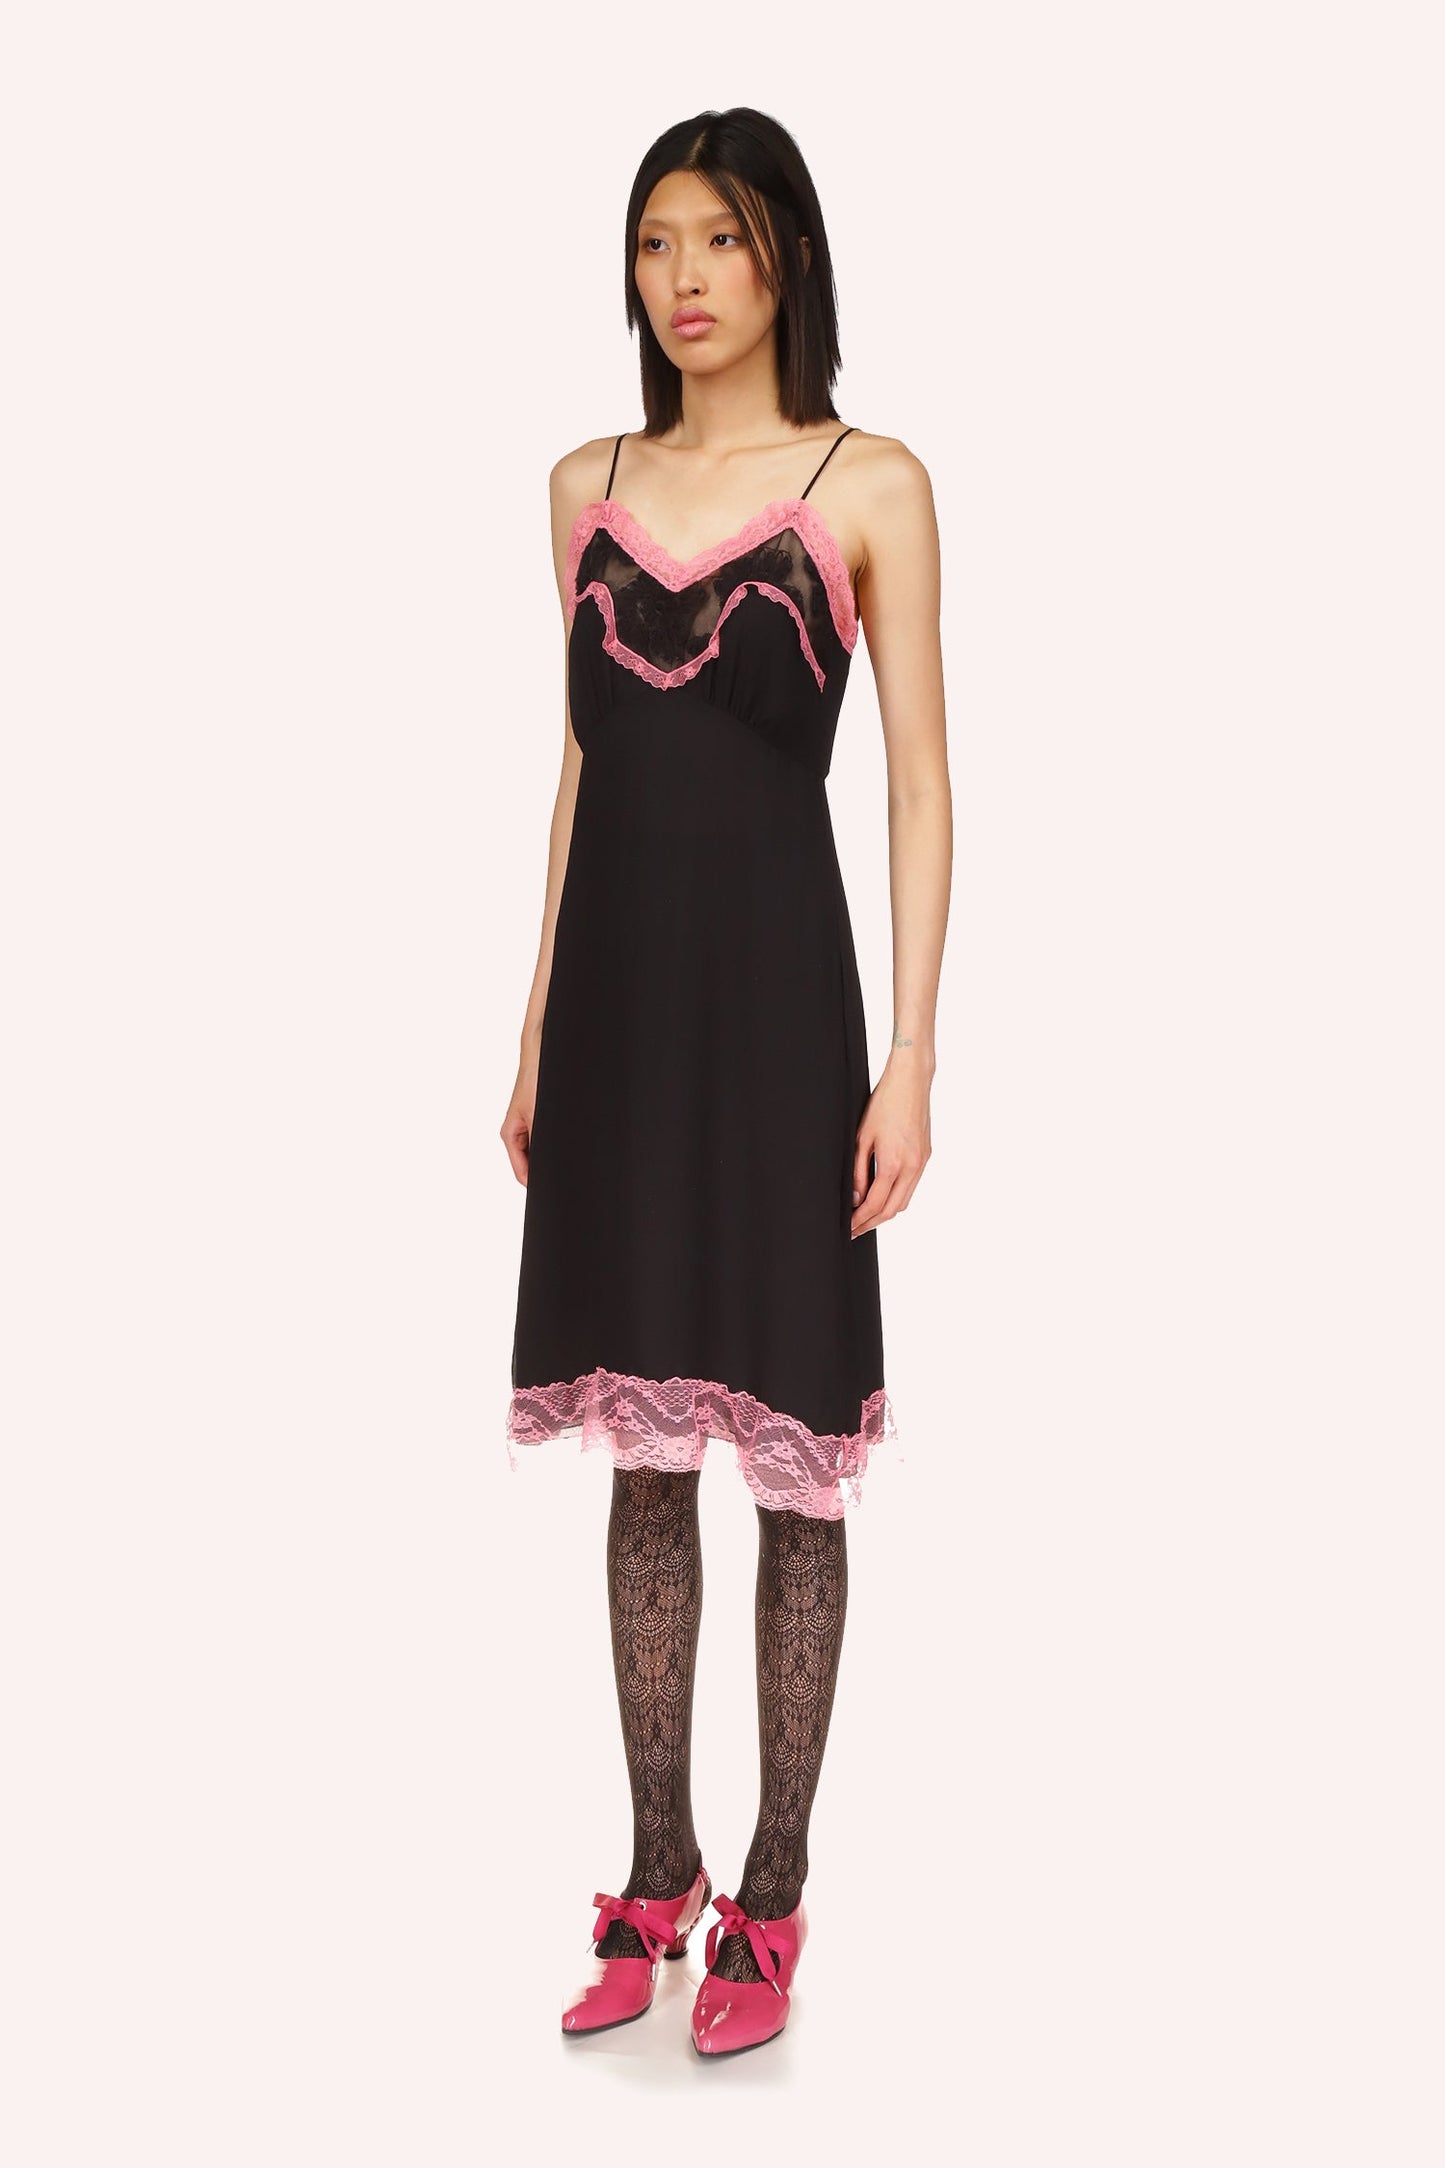 Lingerie Chiffon Dress, black with rose highlight pink rim lace top/bottom, sleeveless, 2-straps 